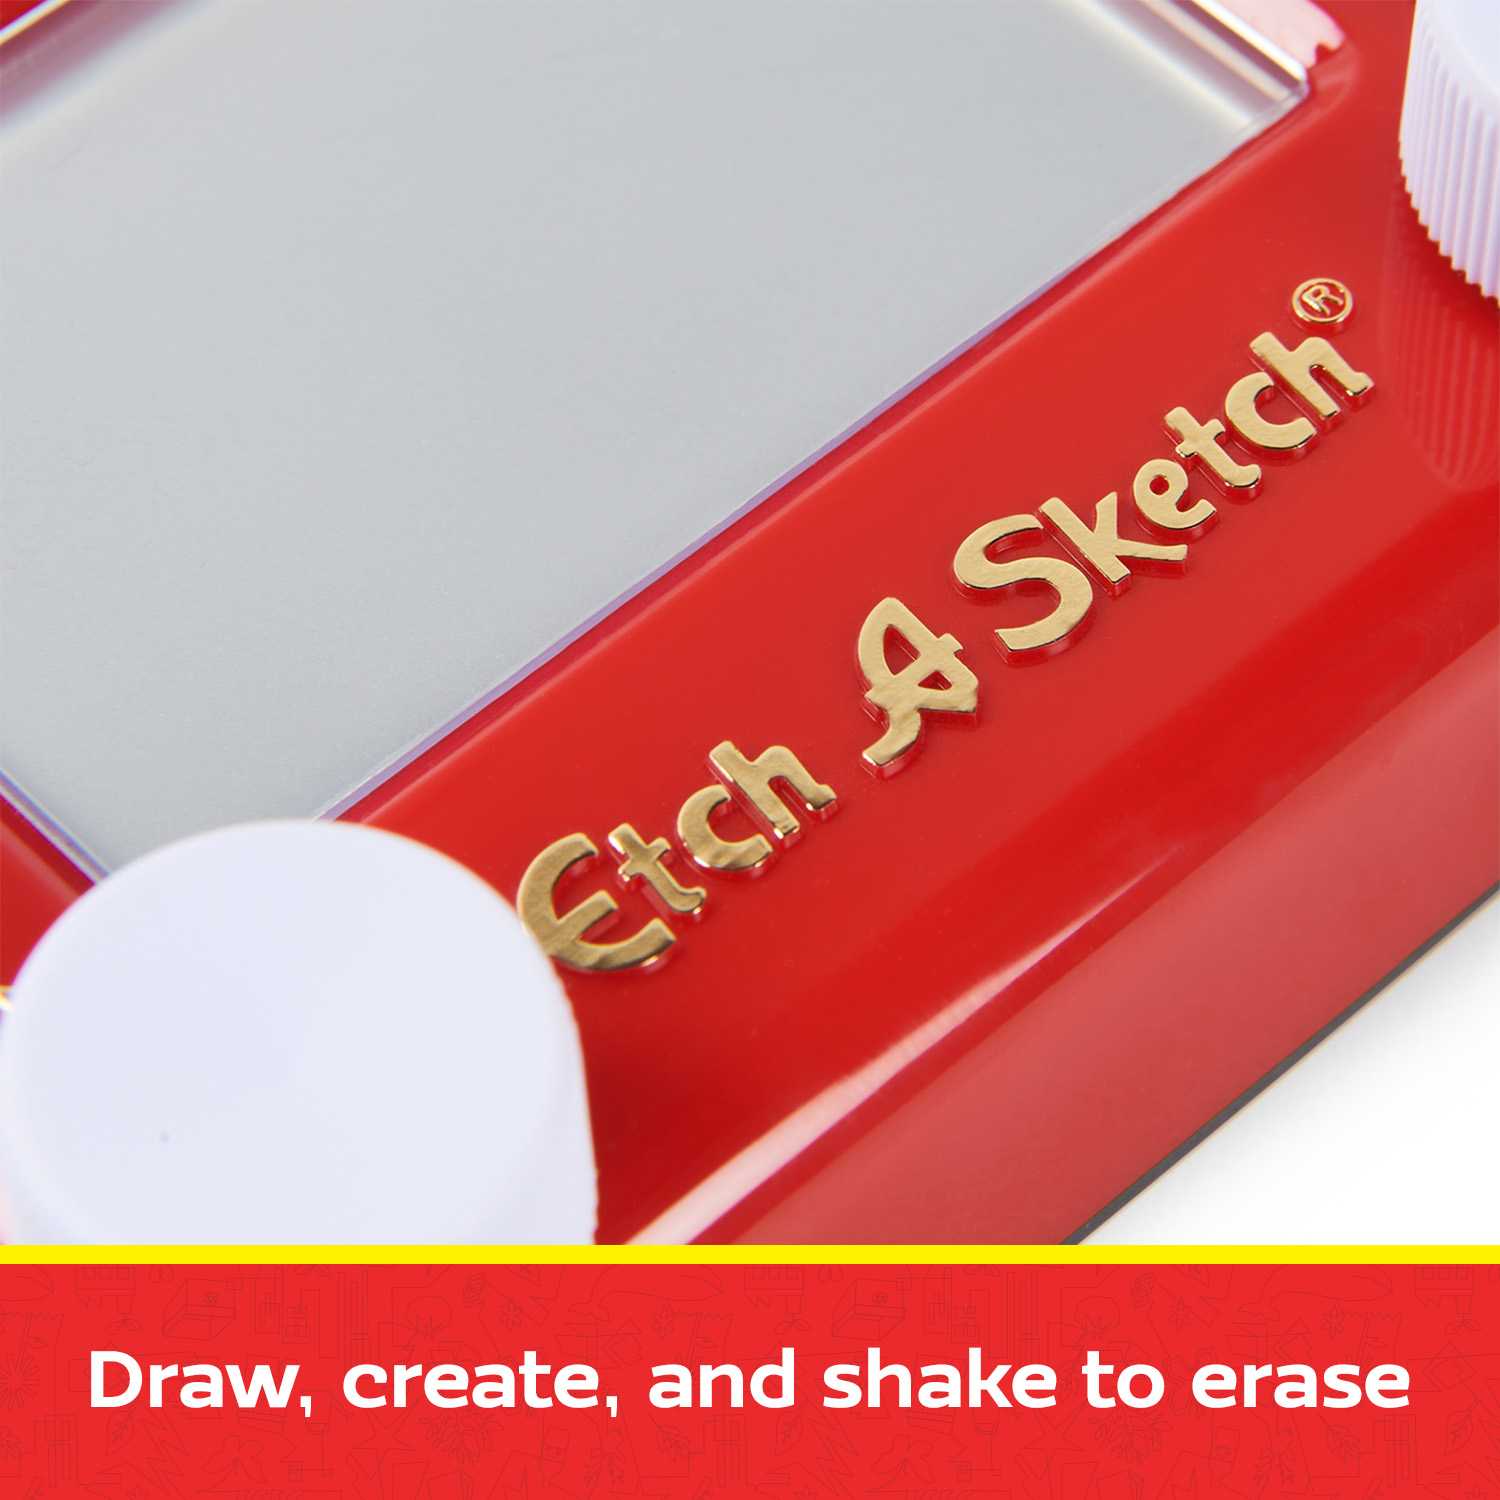 Pocket Etch A Sketch Sustainable